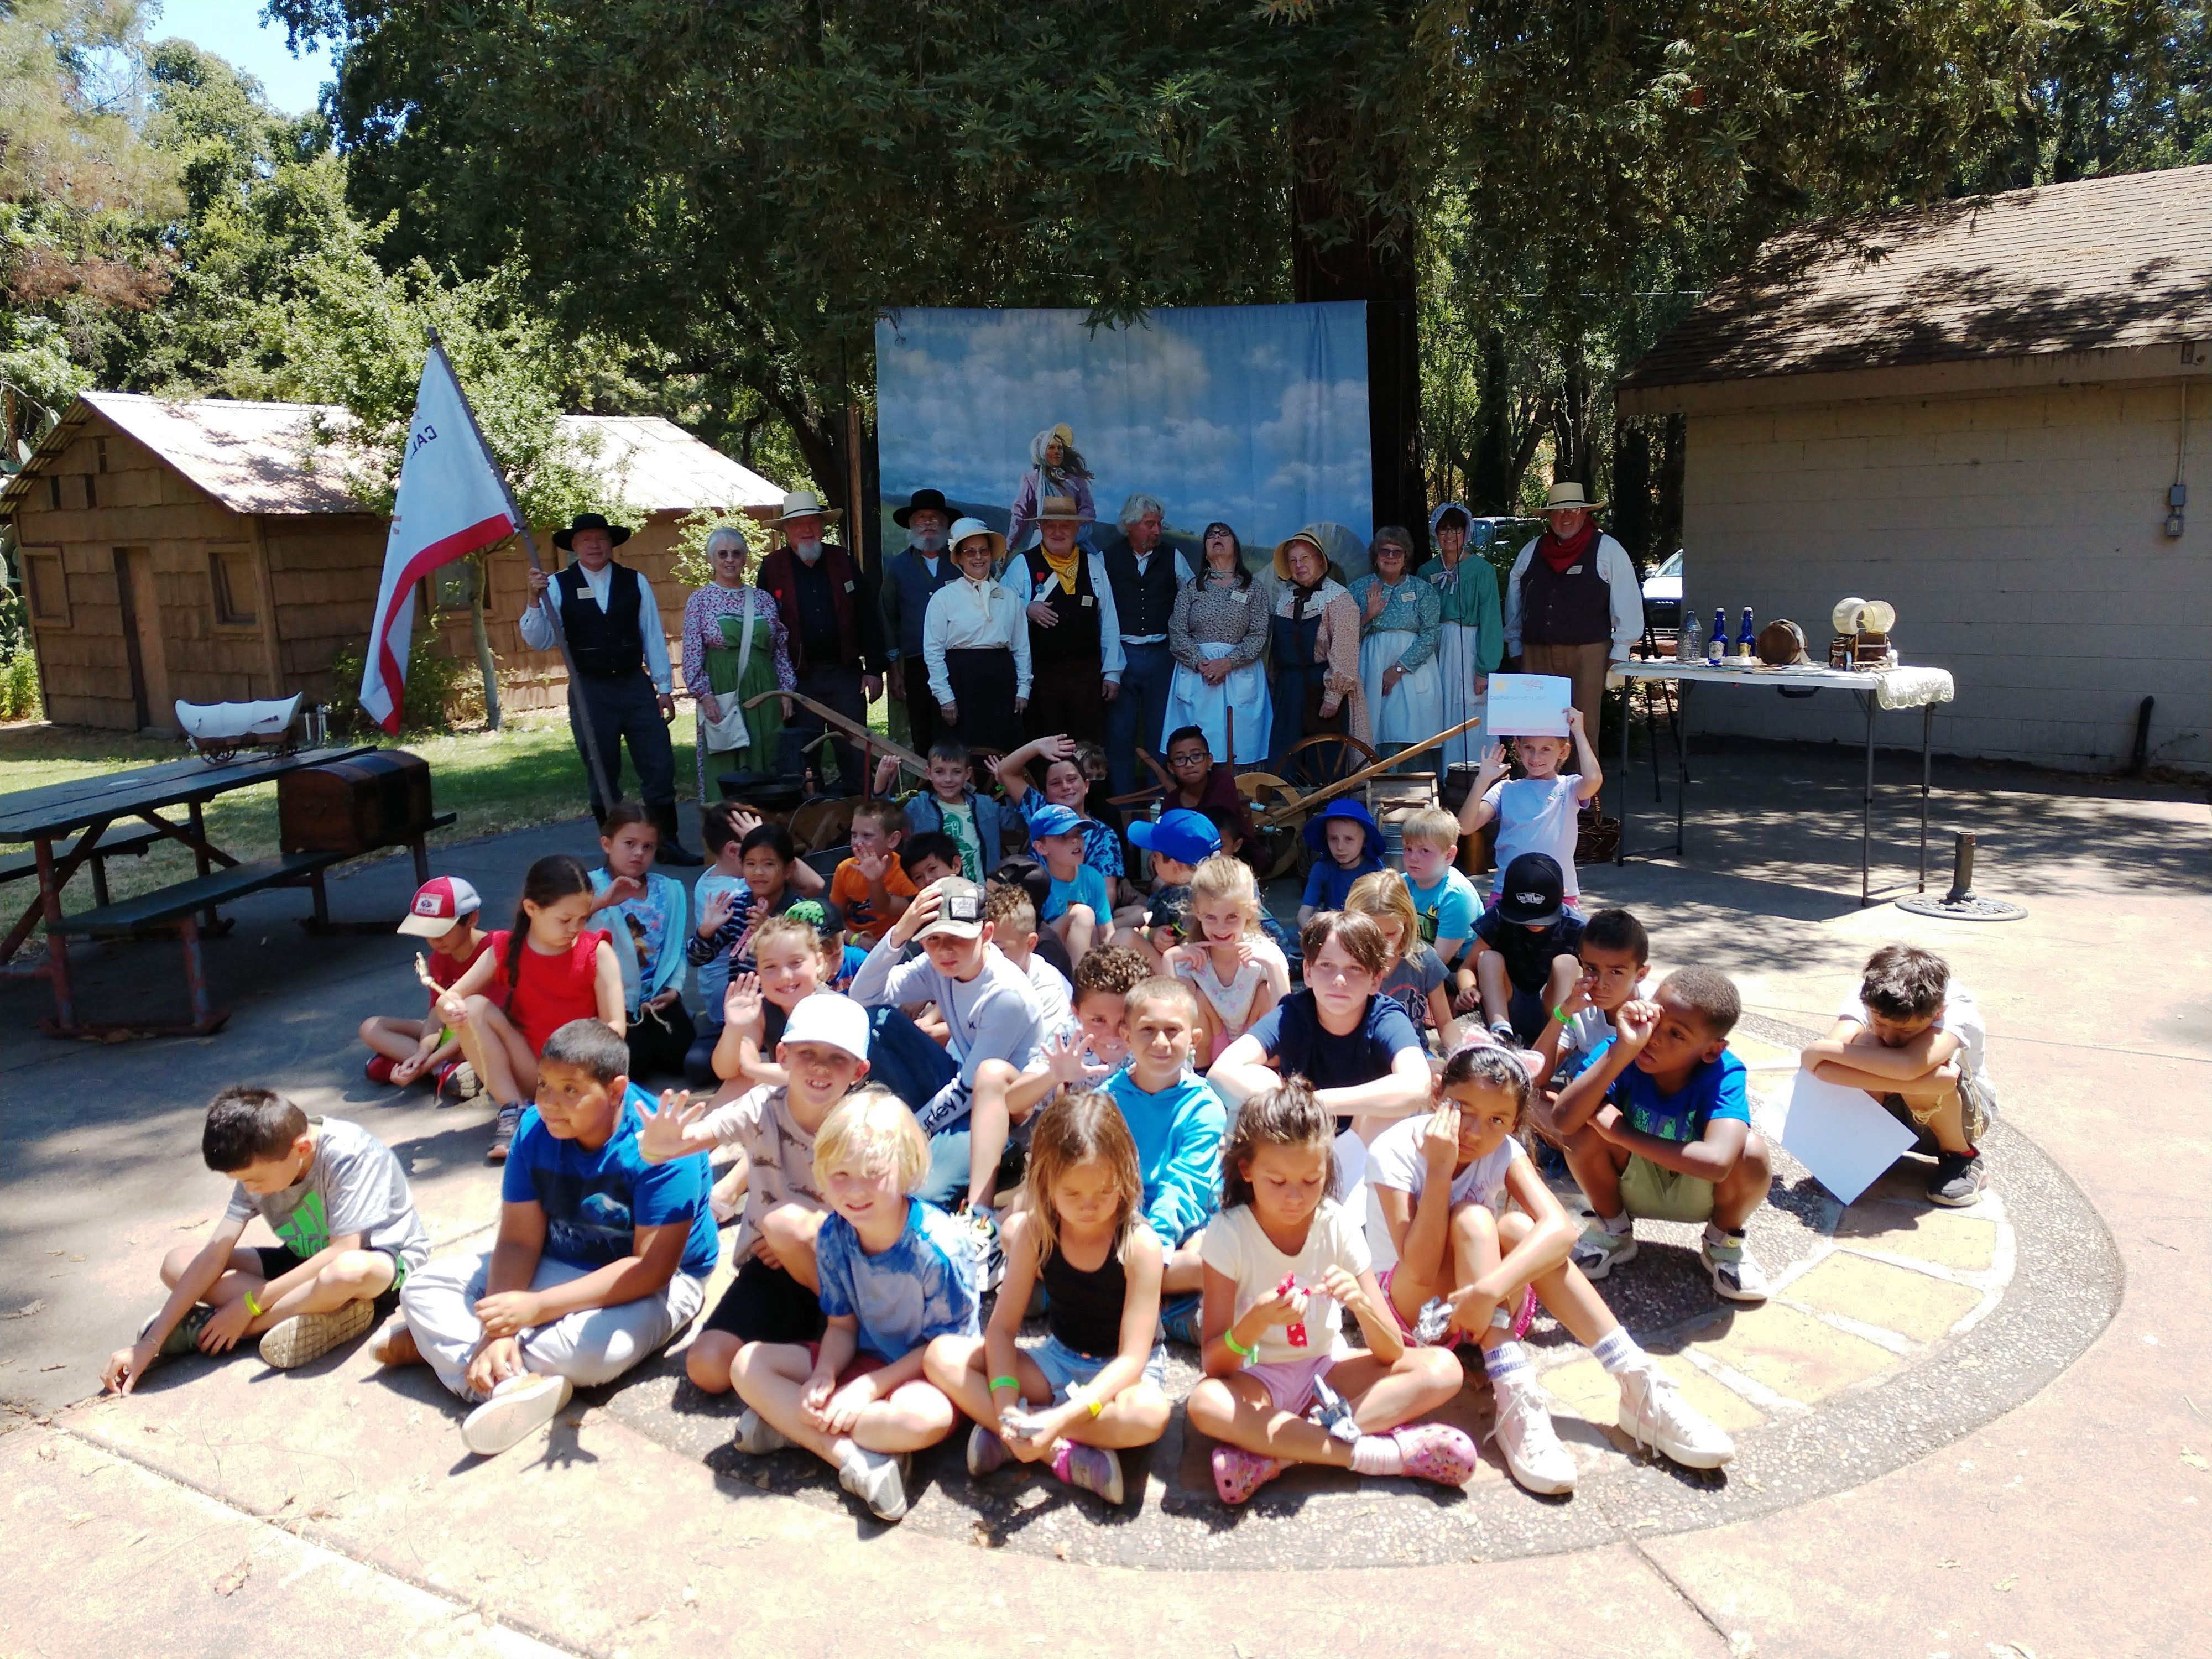 Camp Adobe Campers with members of Californa Living History